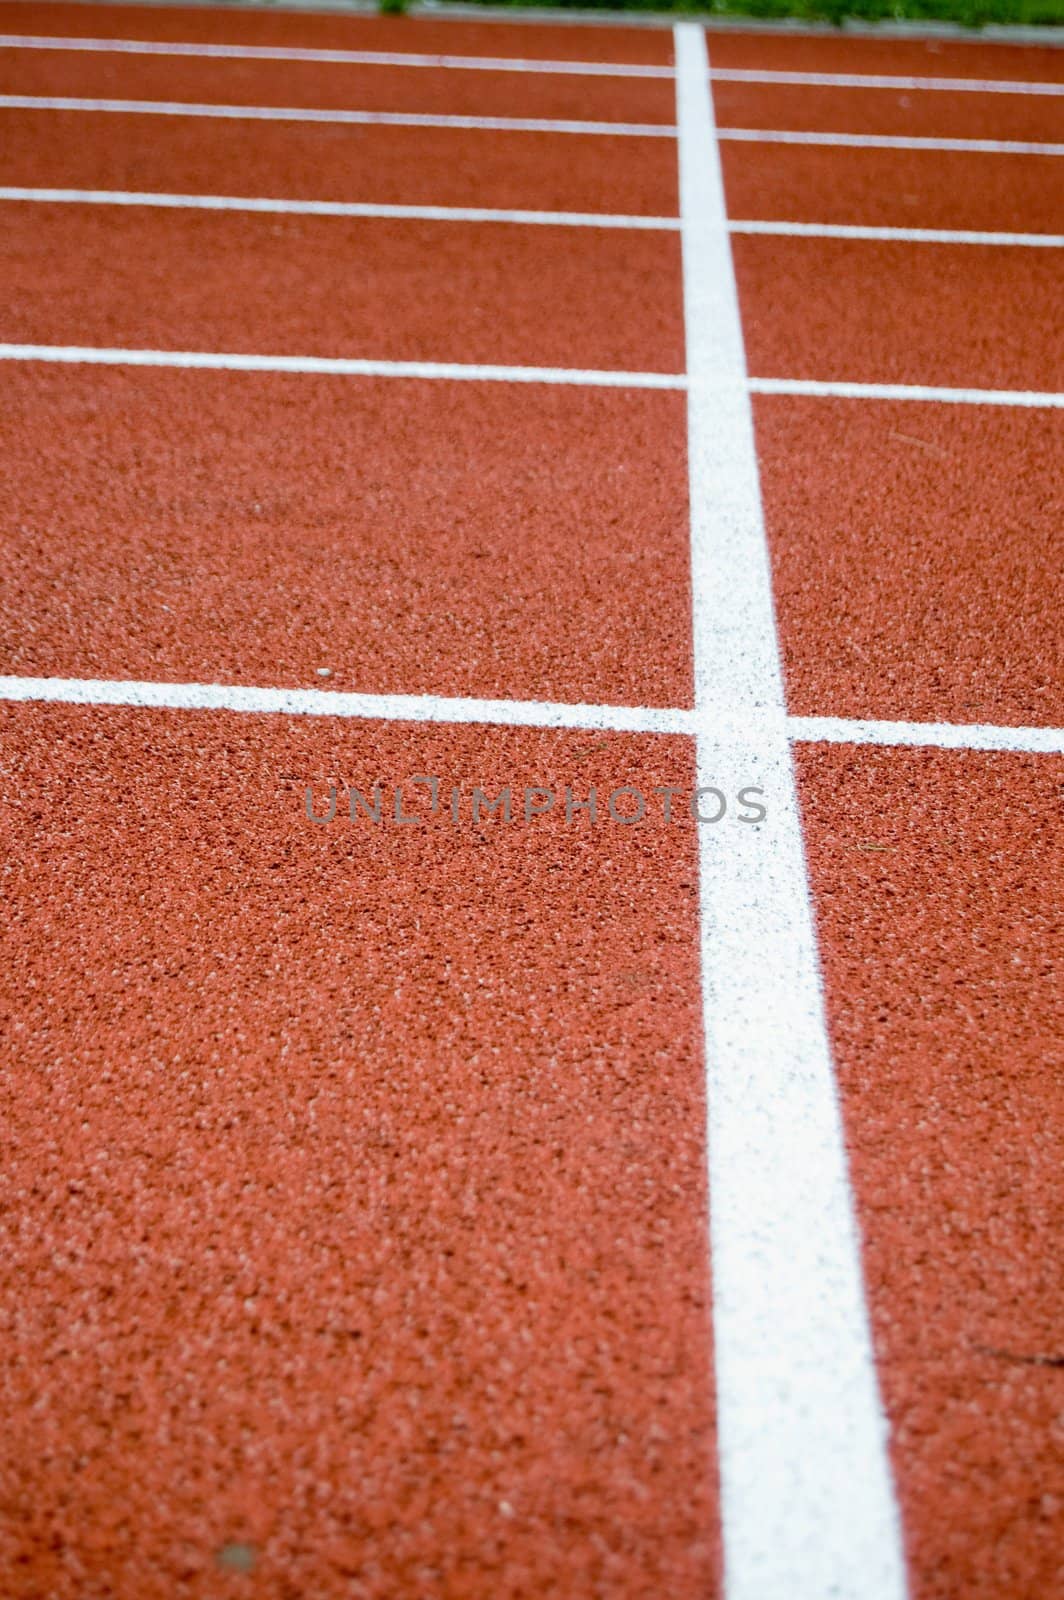 startline for a sprint on an athletic track